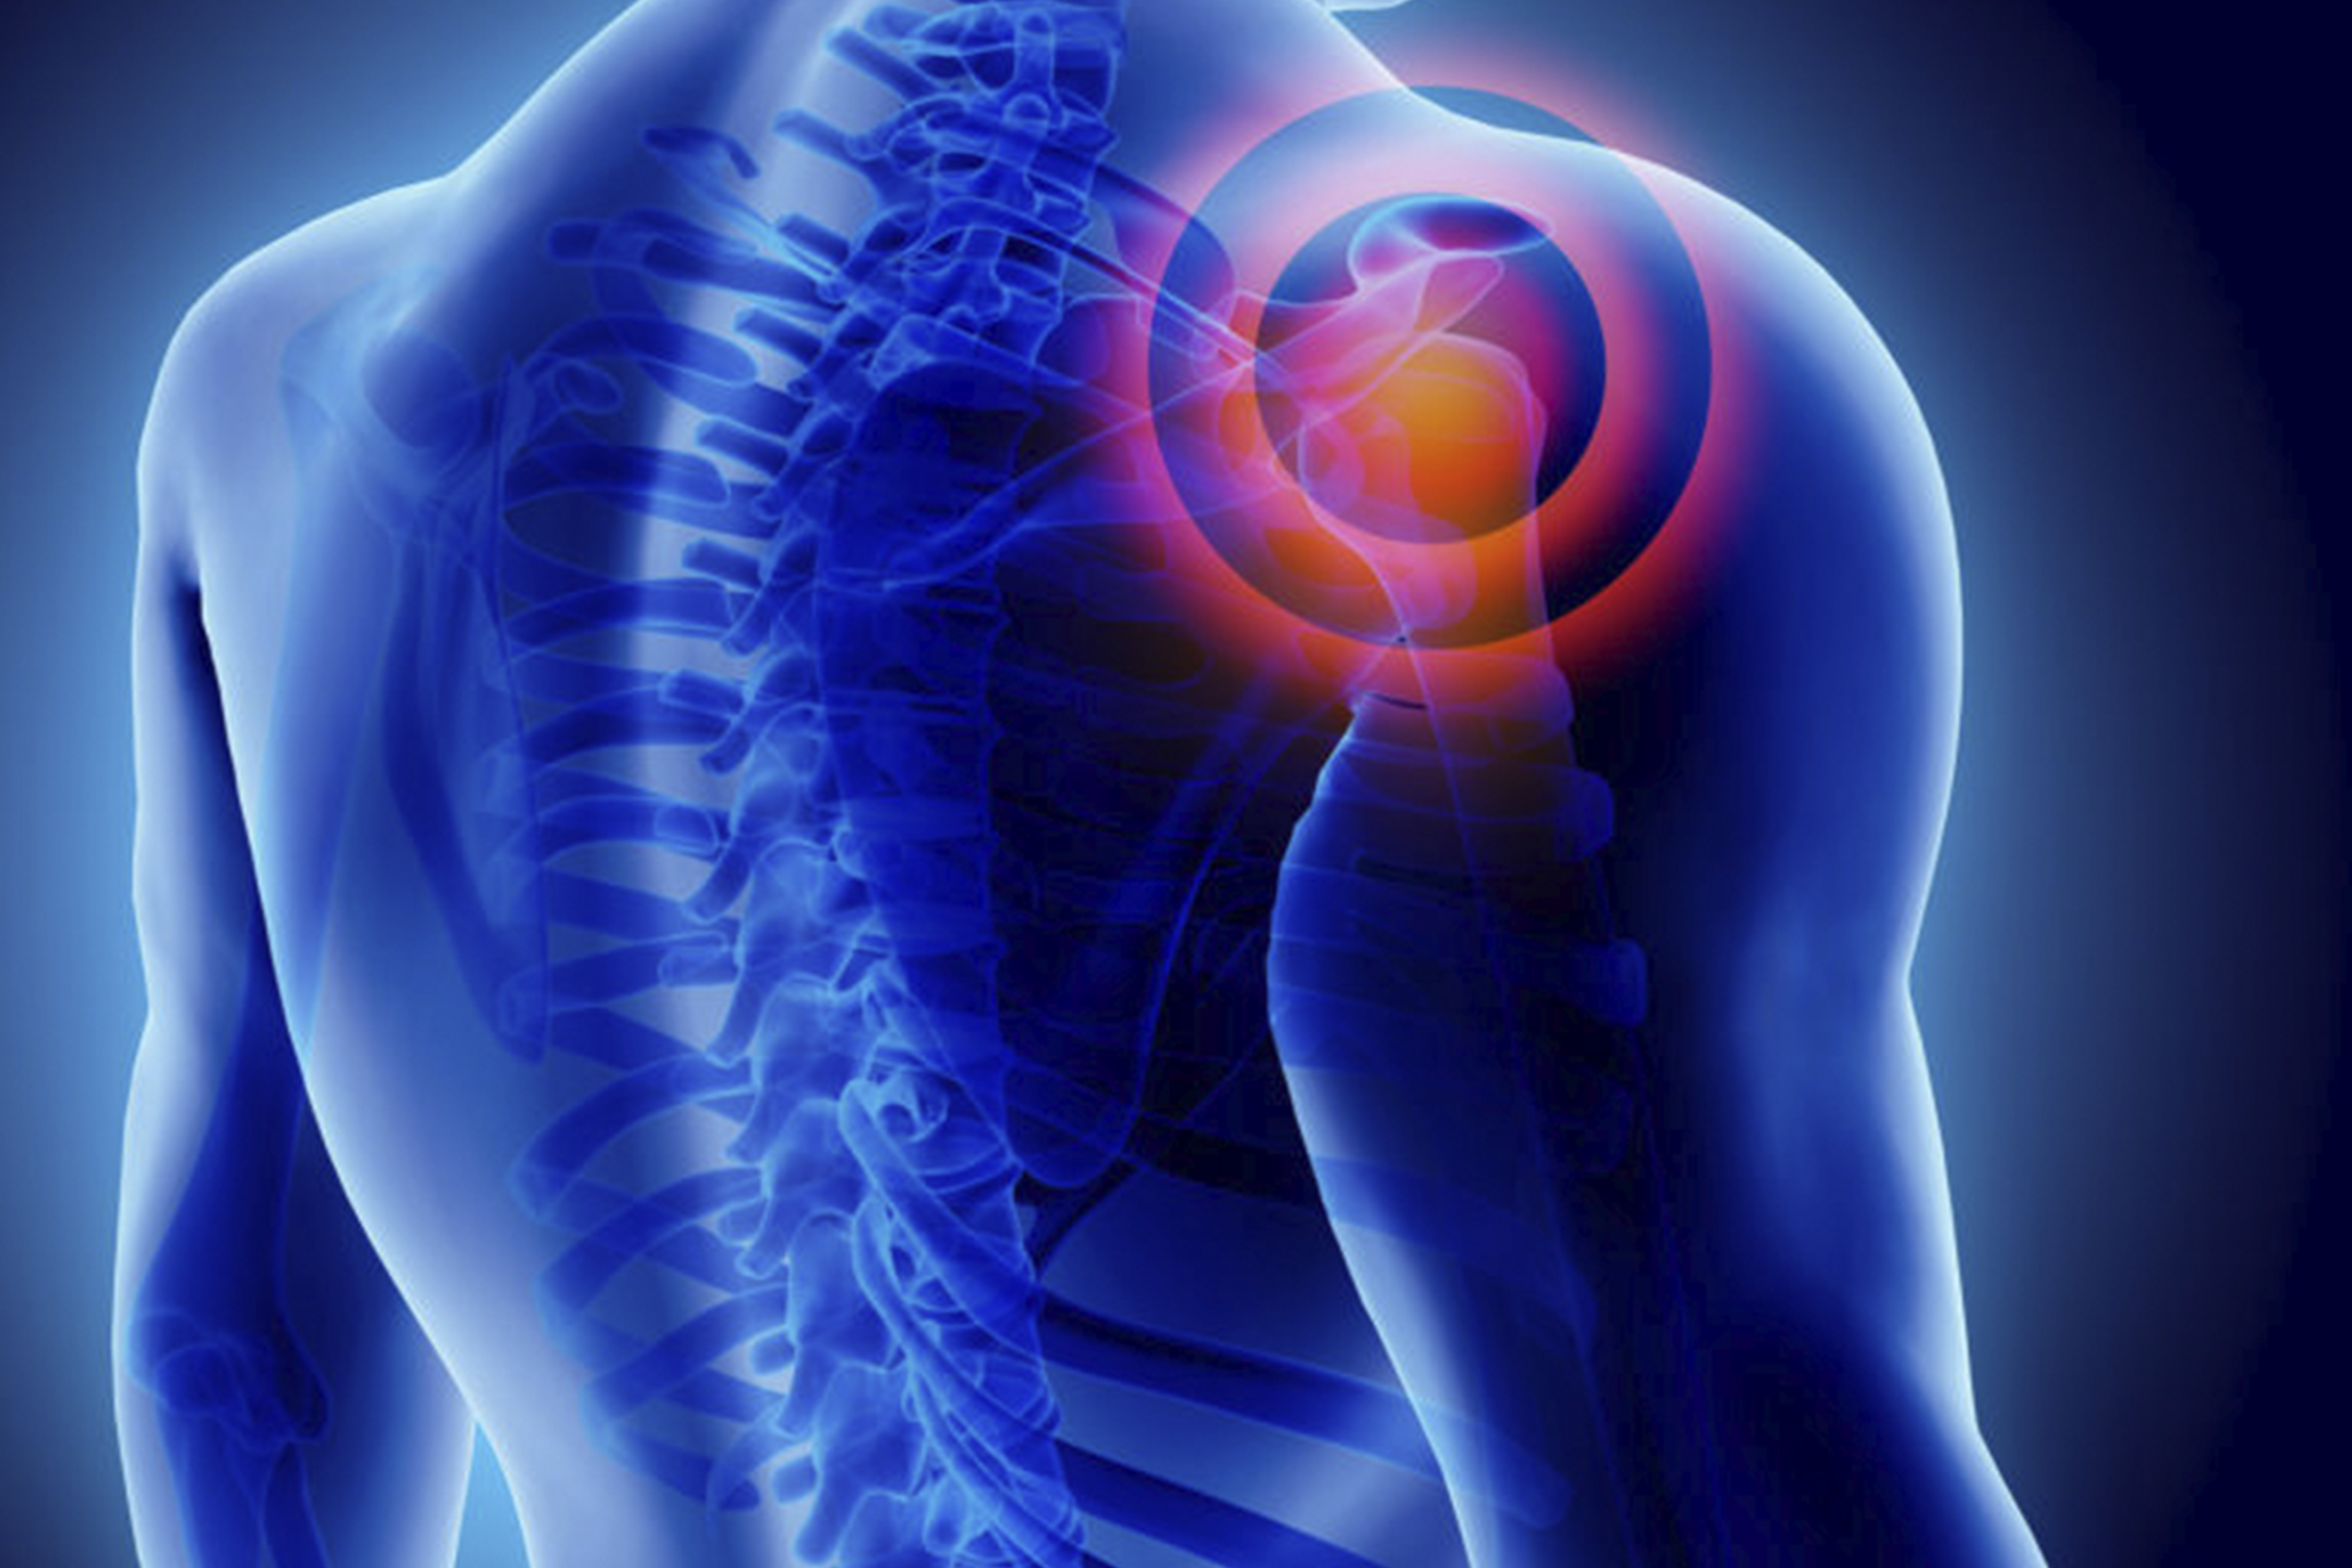 shoulder pain targeting inside of the body